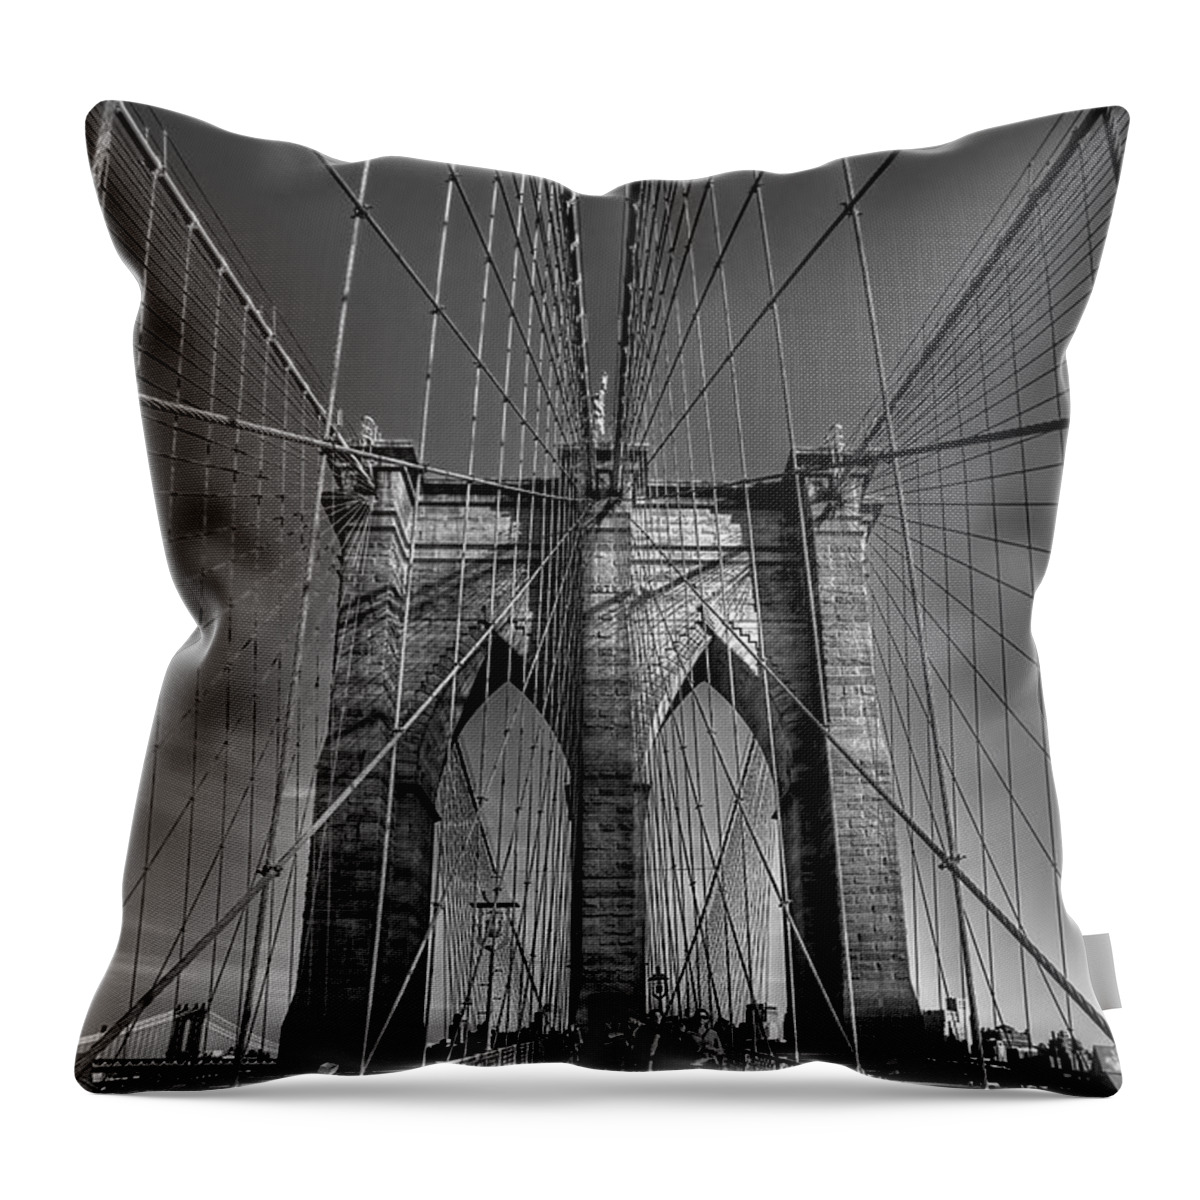 Architecture Throw Pillow featuring the photograph Spider Web by Evelina Kremsdorf